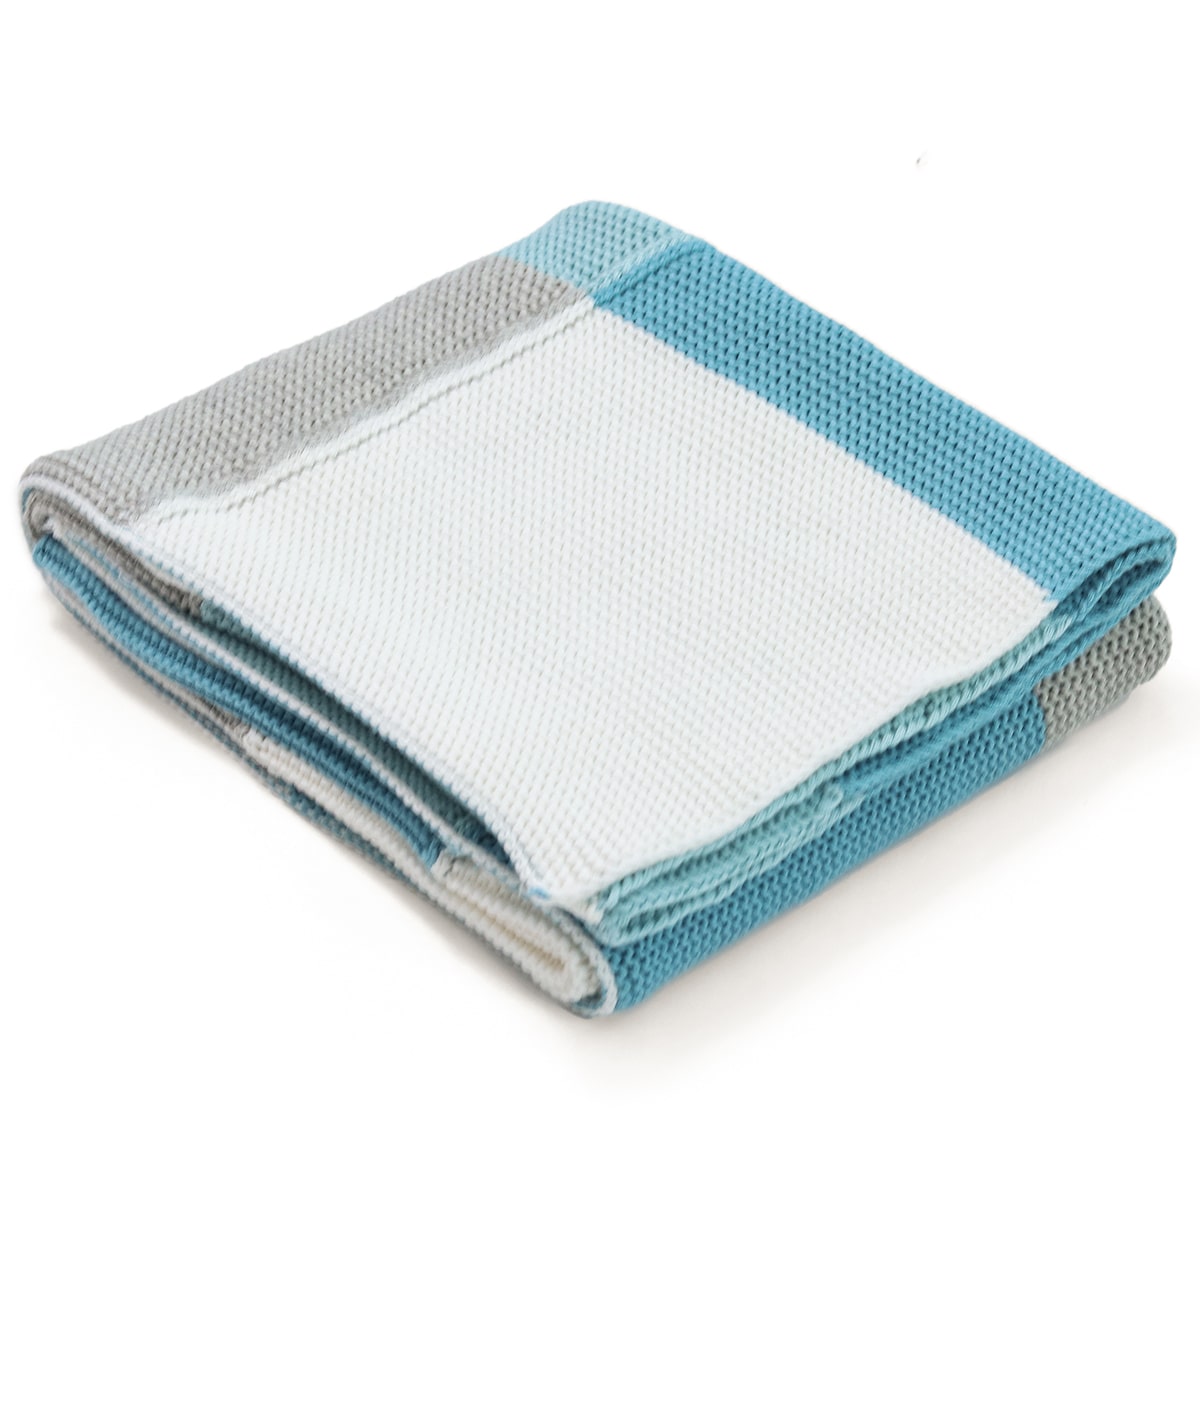 Transfer Knit Color Blocks with Stripes- Baby Blue Color Cotton Knitted Ac Blanket For Baby / Infant / New Born For Use In All Seasons